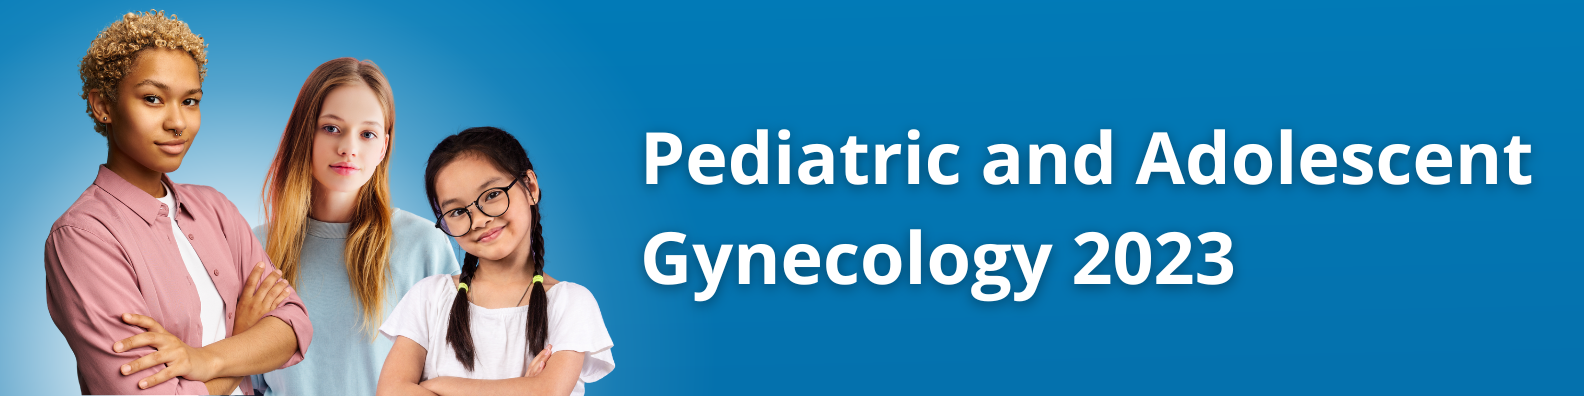 Pediatric and Adolescent Gynecology 2023 Banner